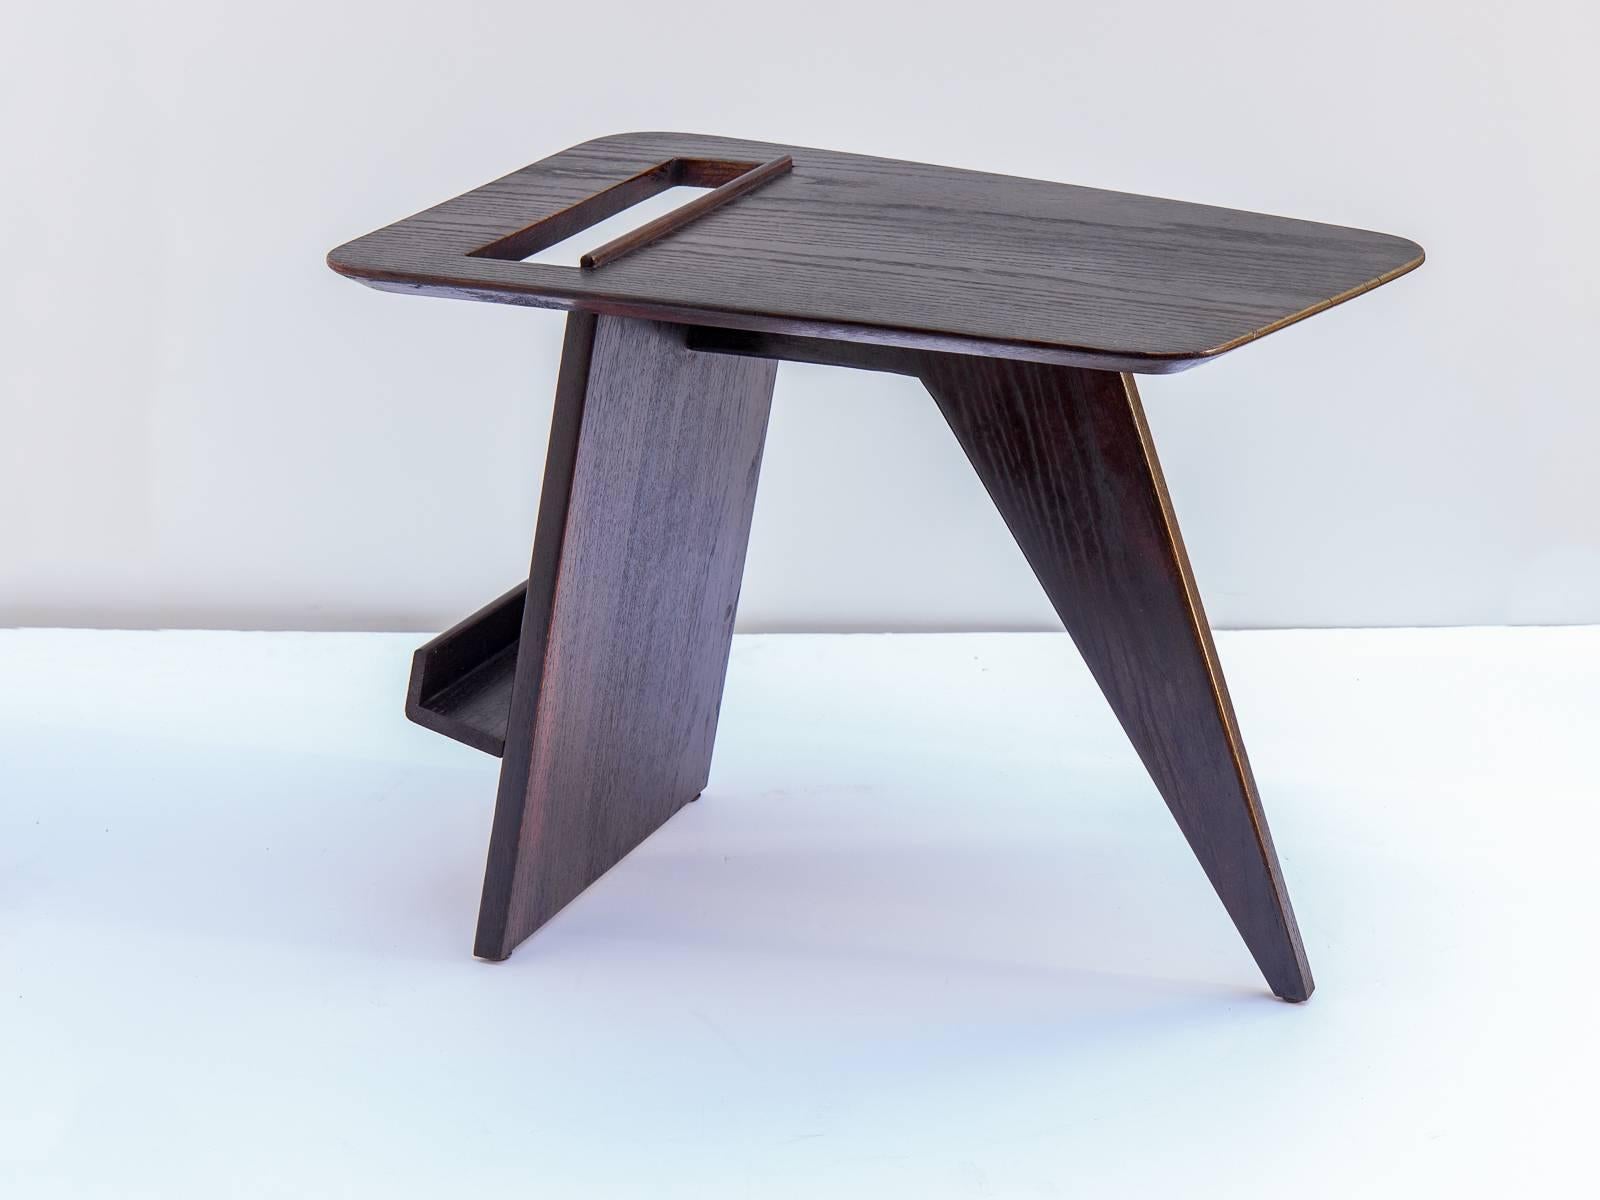 An ebonized, possibly pre-production edition of the T.539 wedge-shaped side table designed by Jens Risom in 1949. In excellent vintage condition.

Measures: 24.75